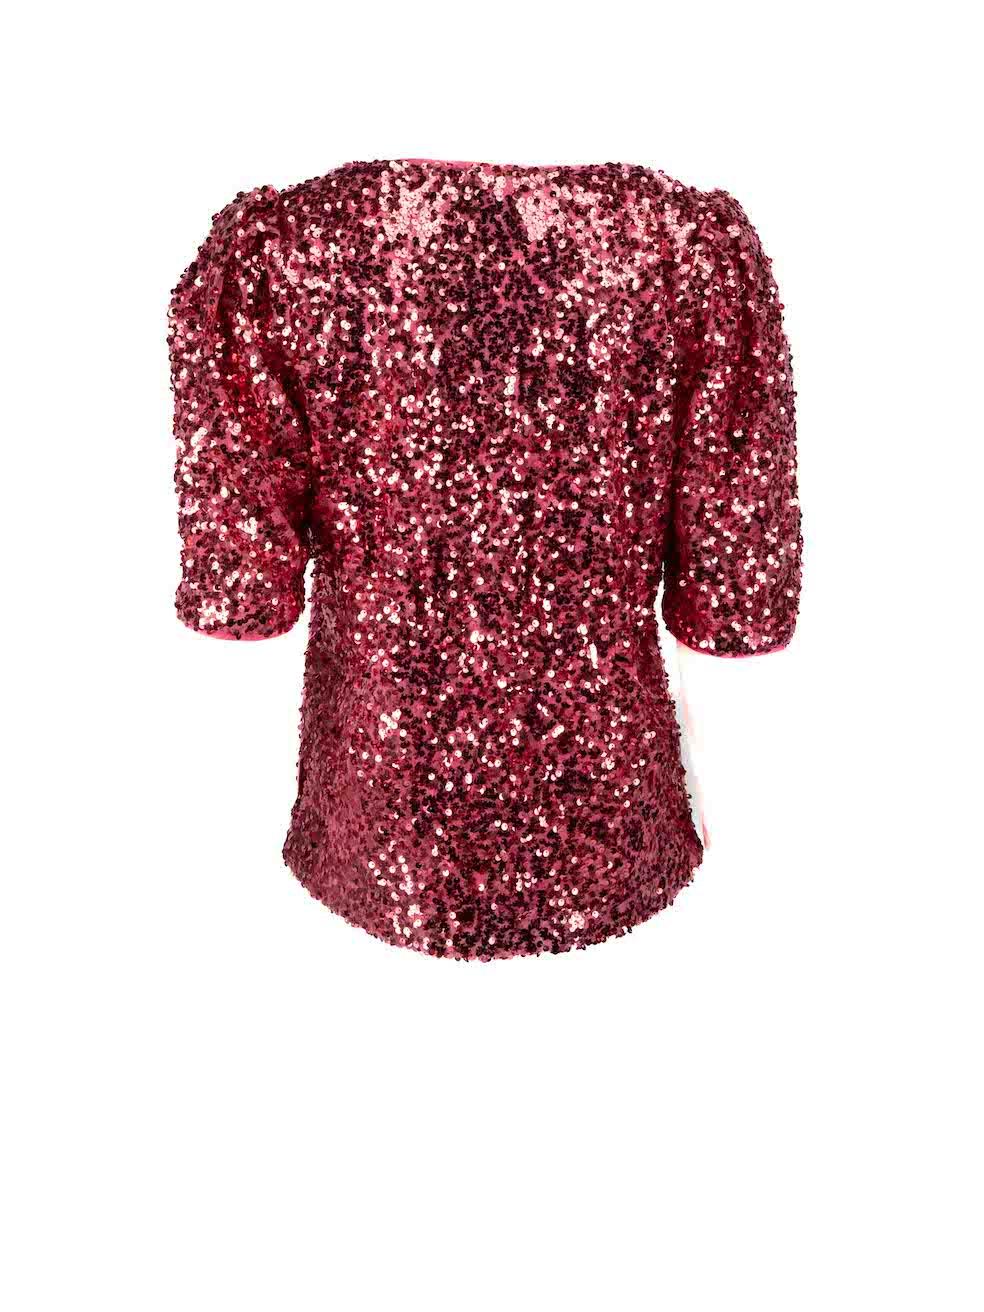 Moschino Love Moschino Pink Sequin Short Sleeve Top Size M In New Condition For Sale In London, GB